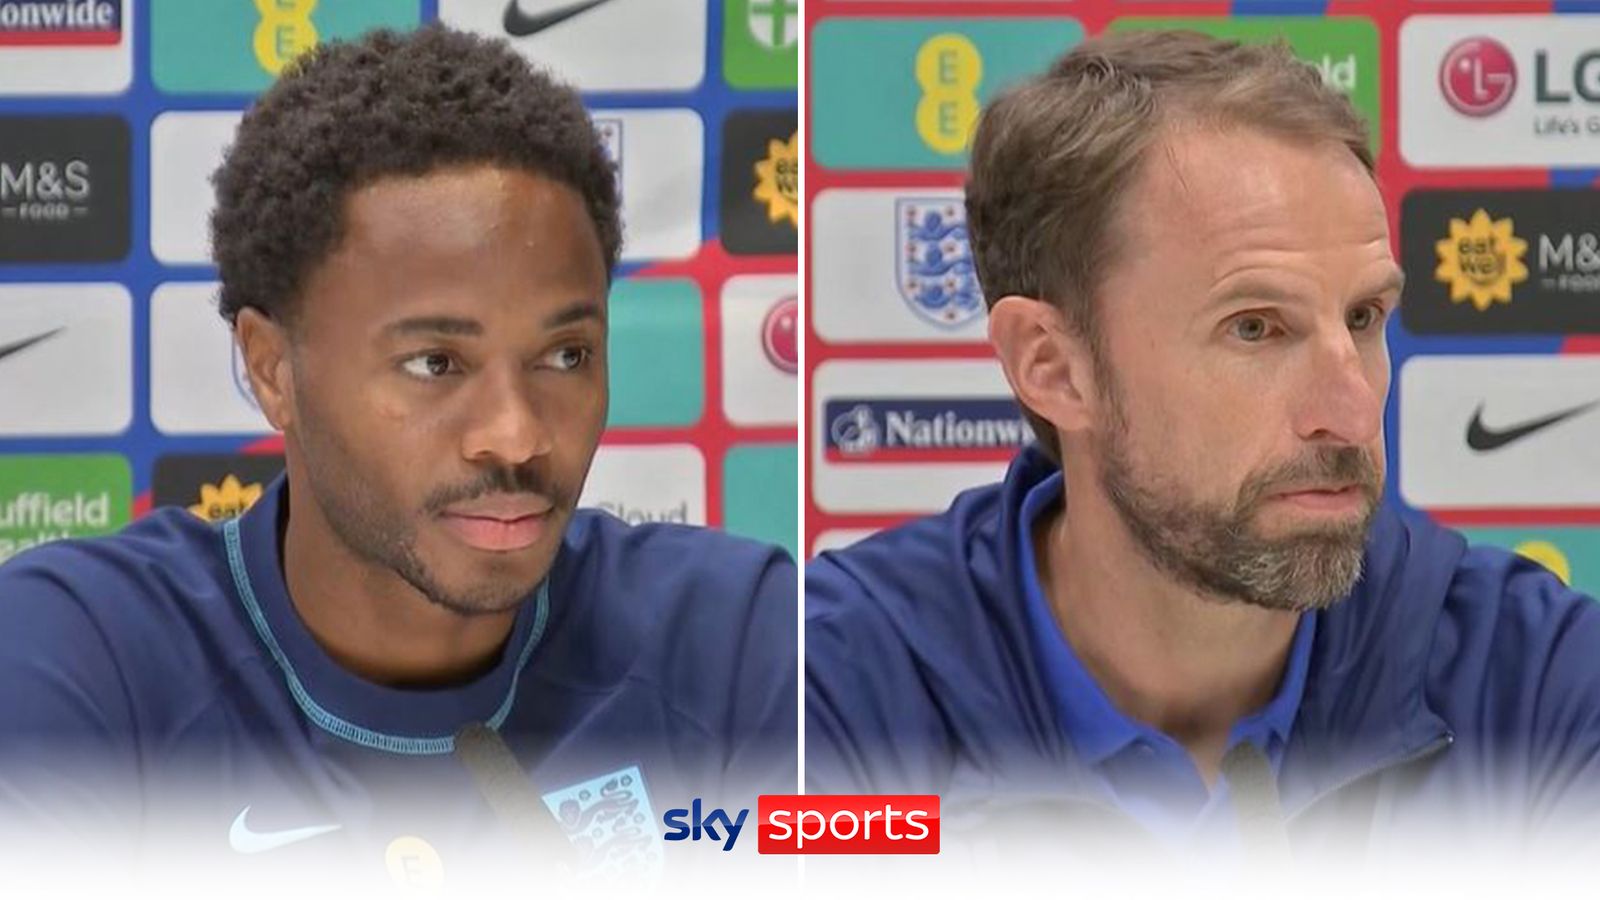 Raheem Sterling: It is not time for England to panic | Gareth Southgate: Experience can help turn things around